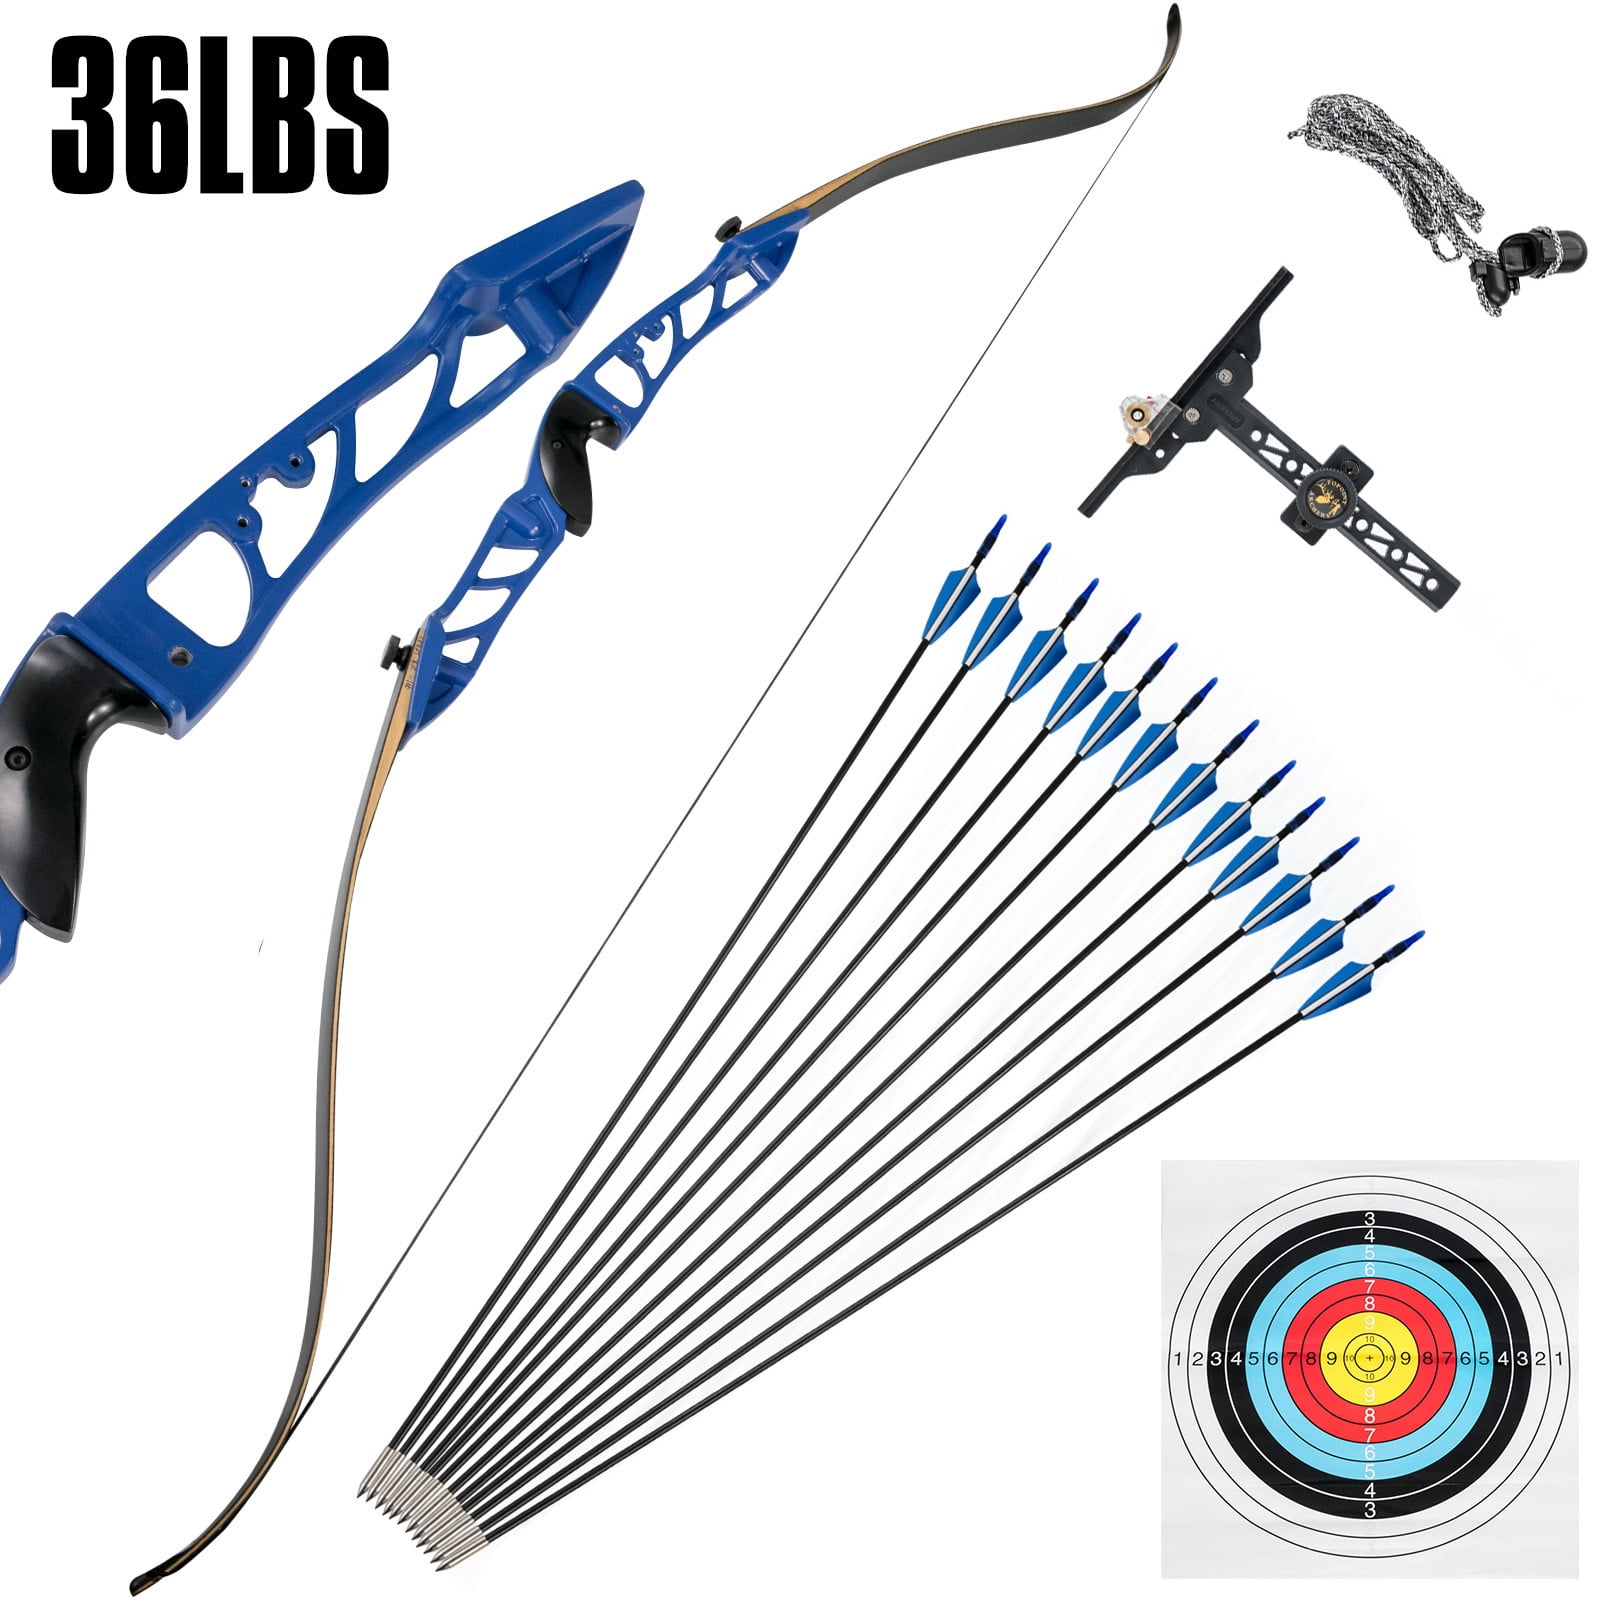 68” RH 26lb Brand New Free Delivery Core Wooden Recurve Adult Bow Package 